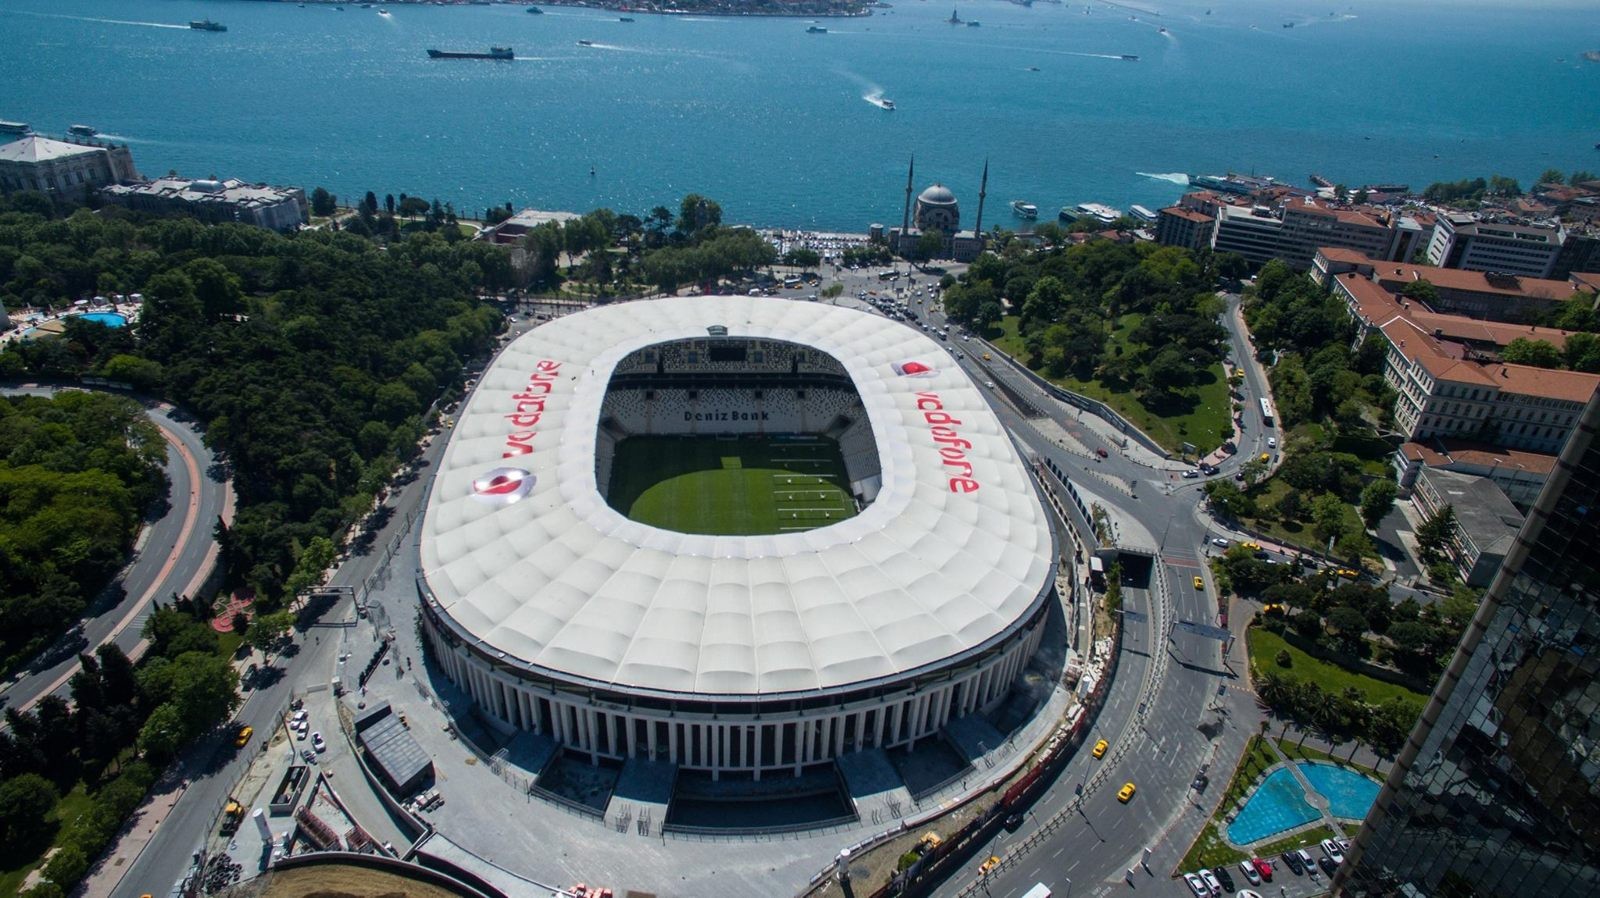 Beu015fiktau015fu2019s stadium, the Vodafone Arena, with a capacity of about 42,000 spectators, was opened in April 2016.